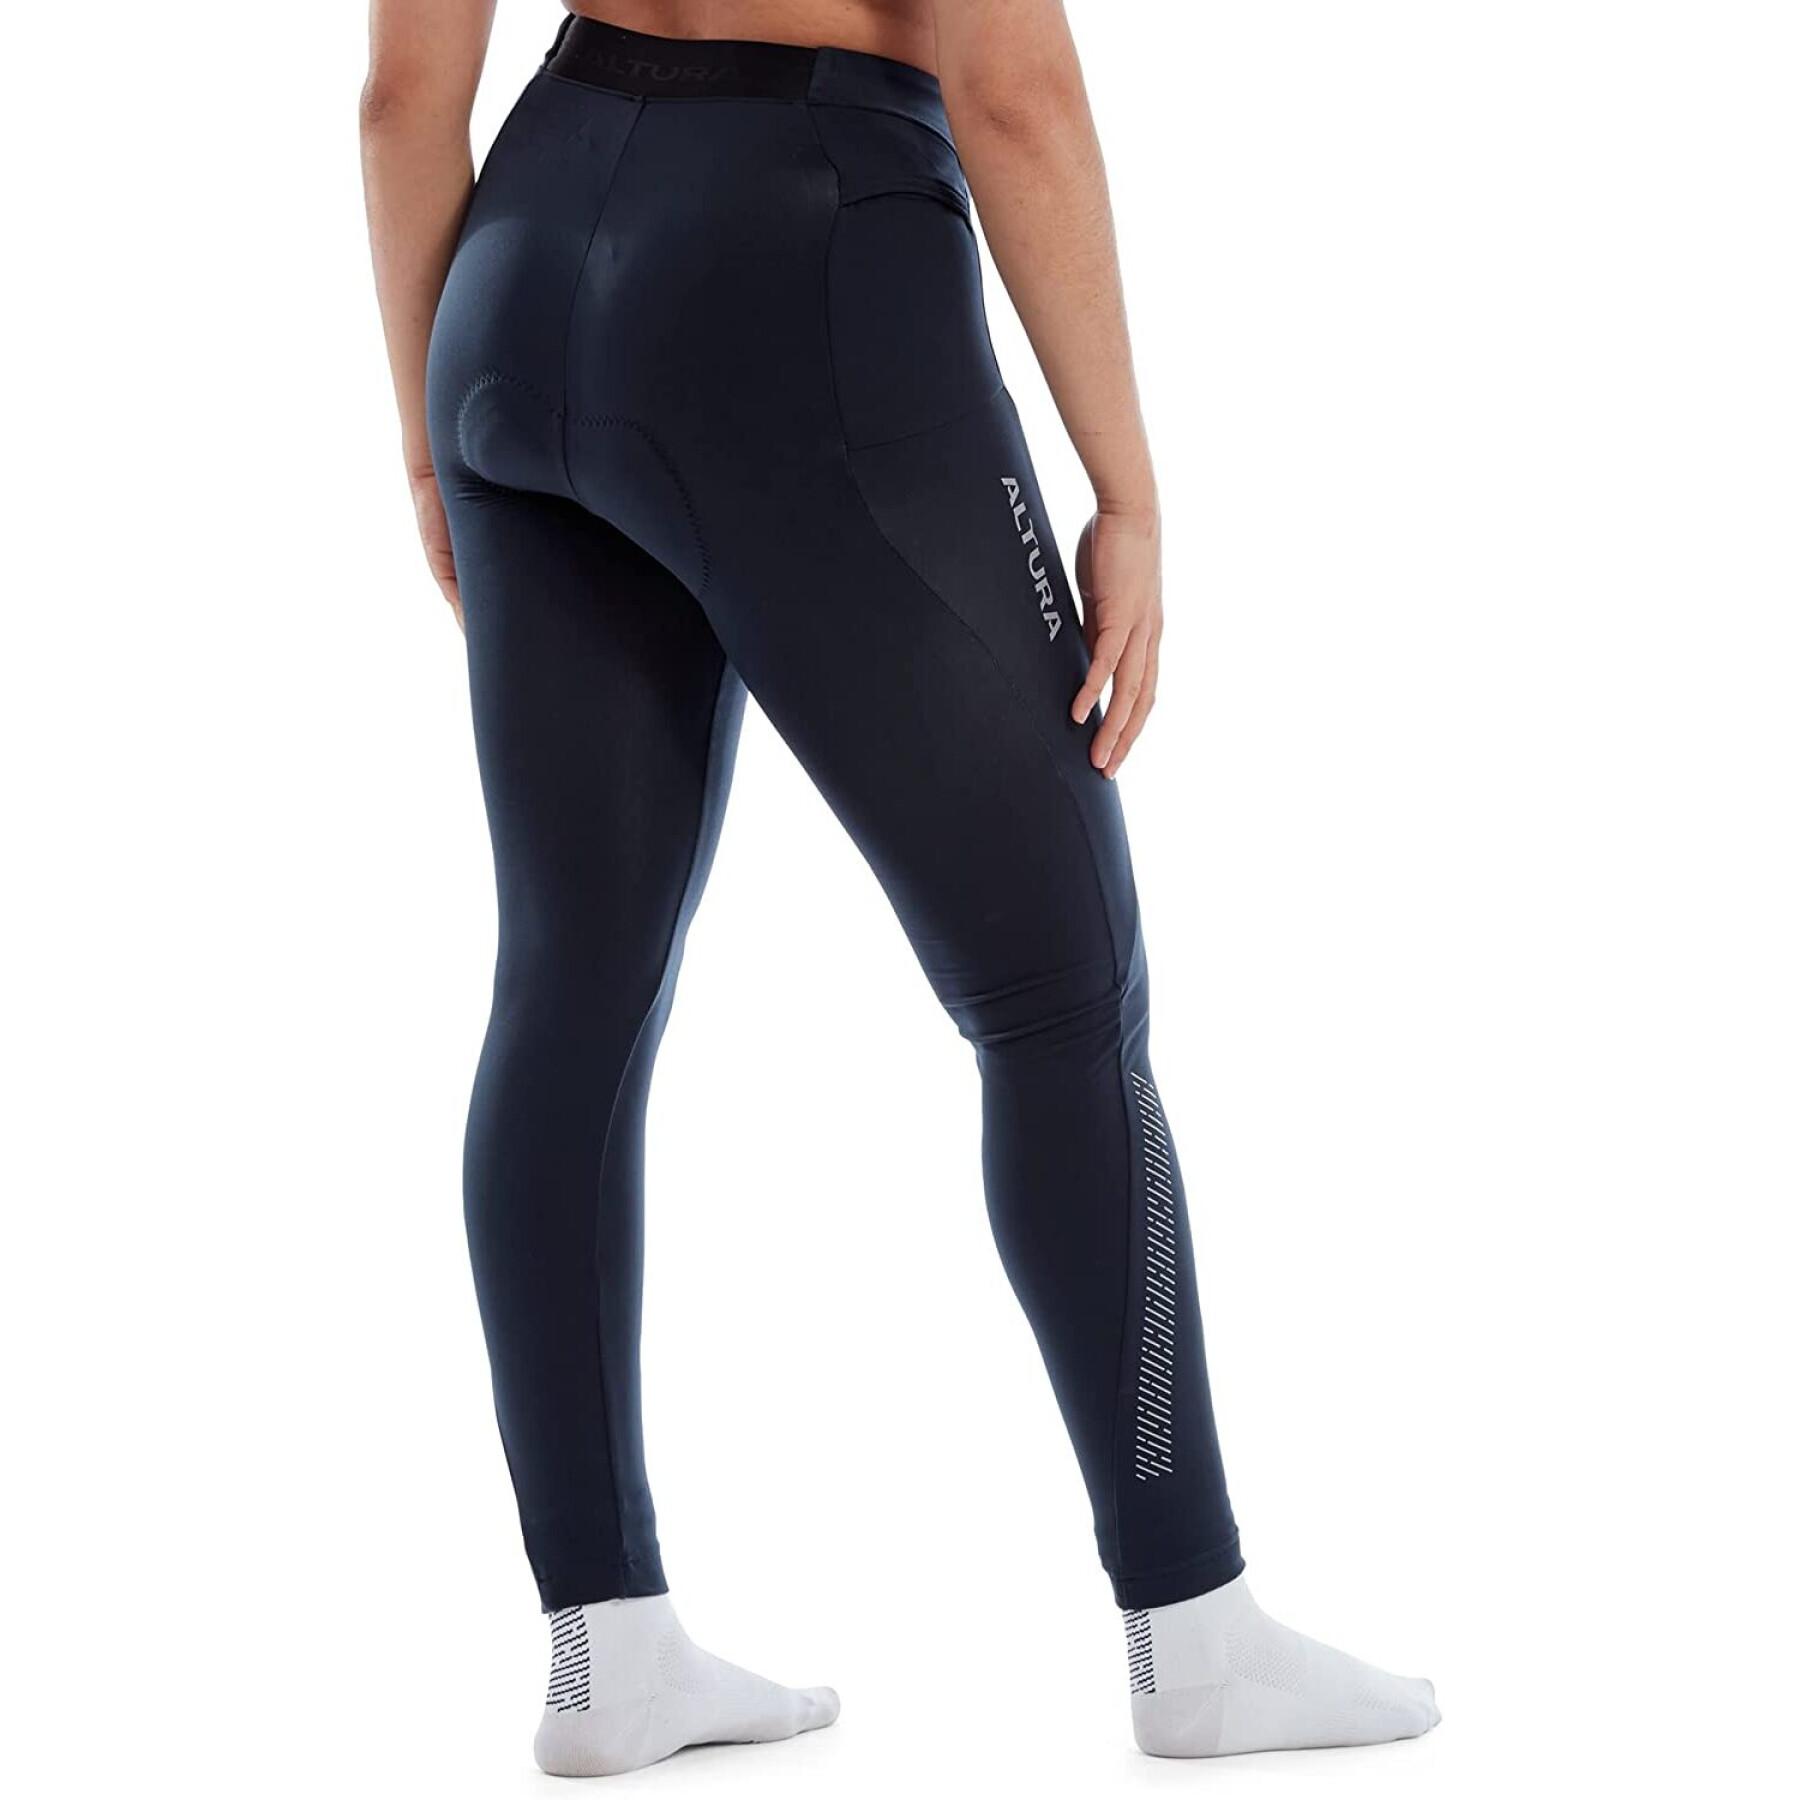 ProGel Plus Womens Thermal Cycling Waist Tights